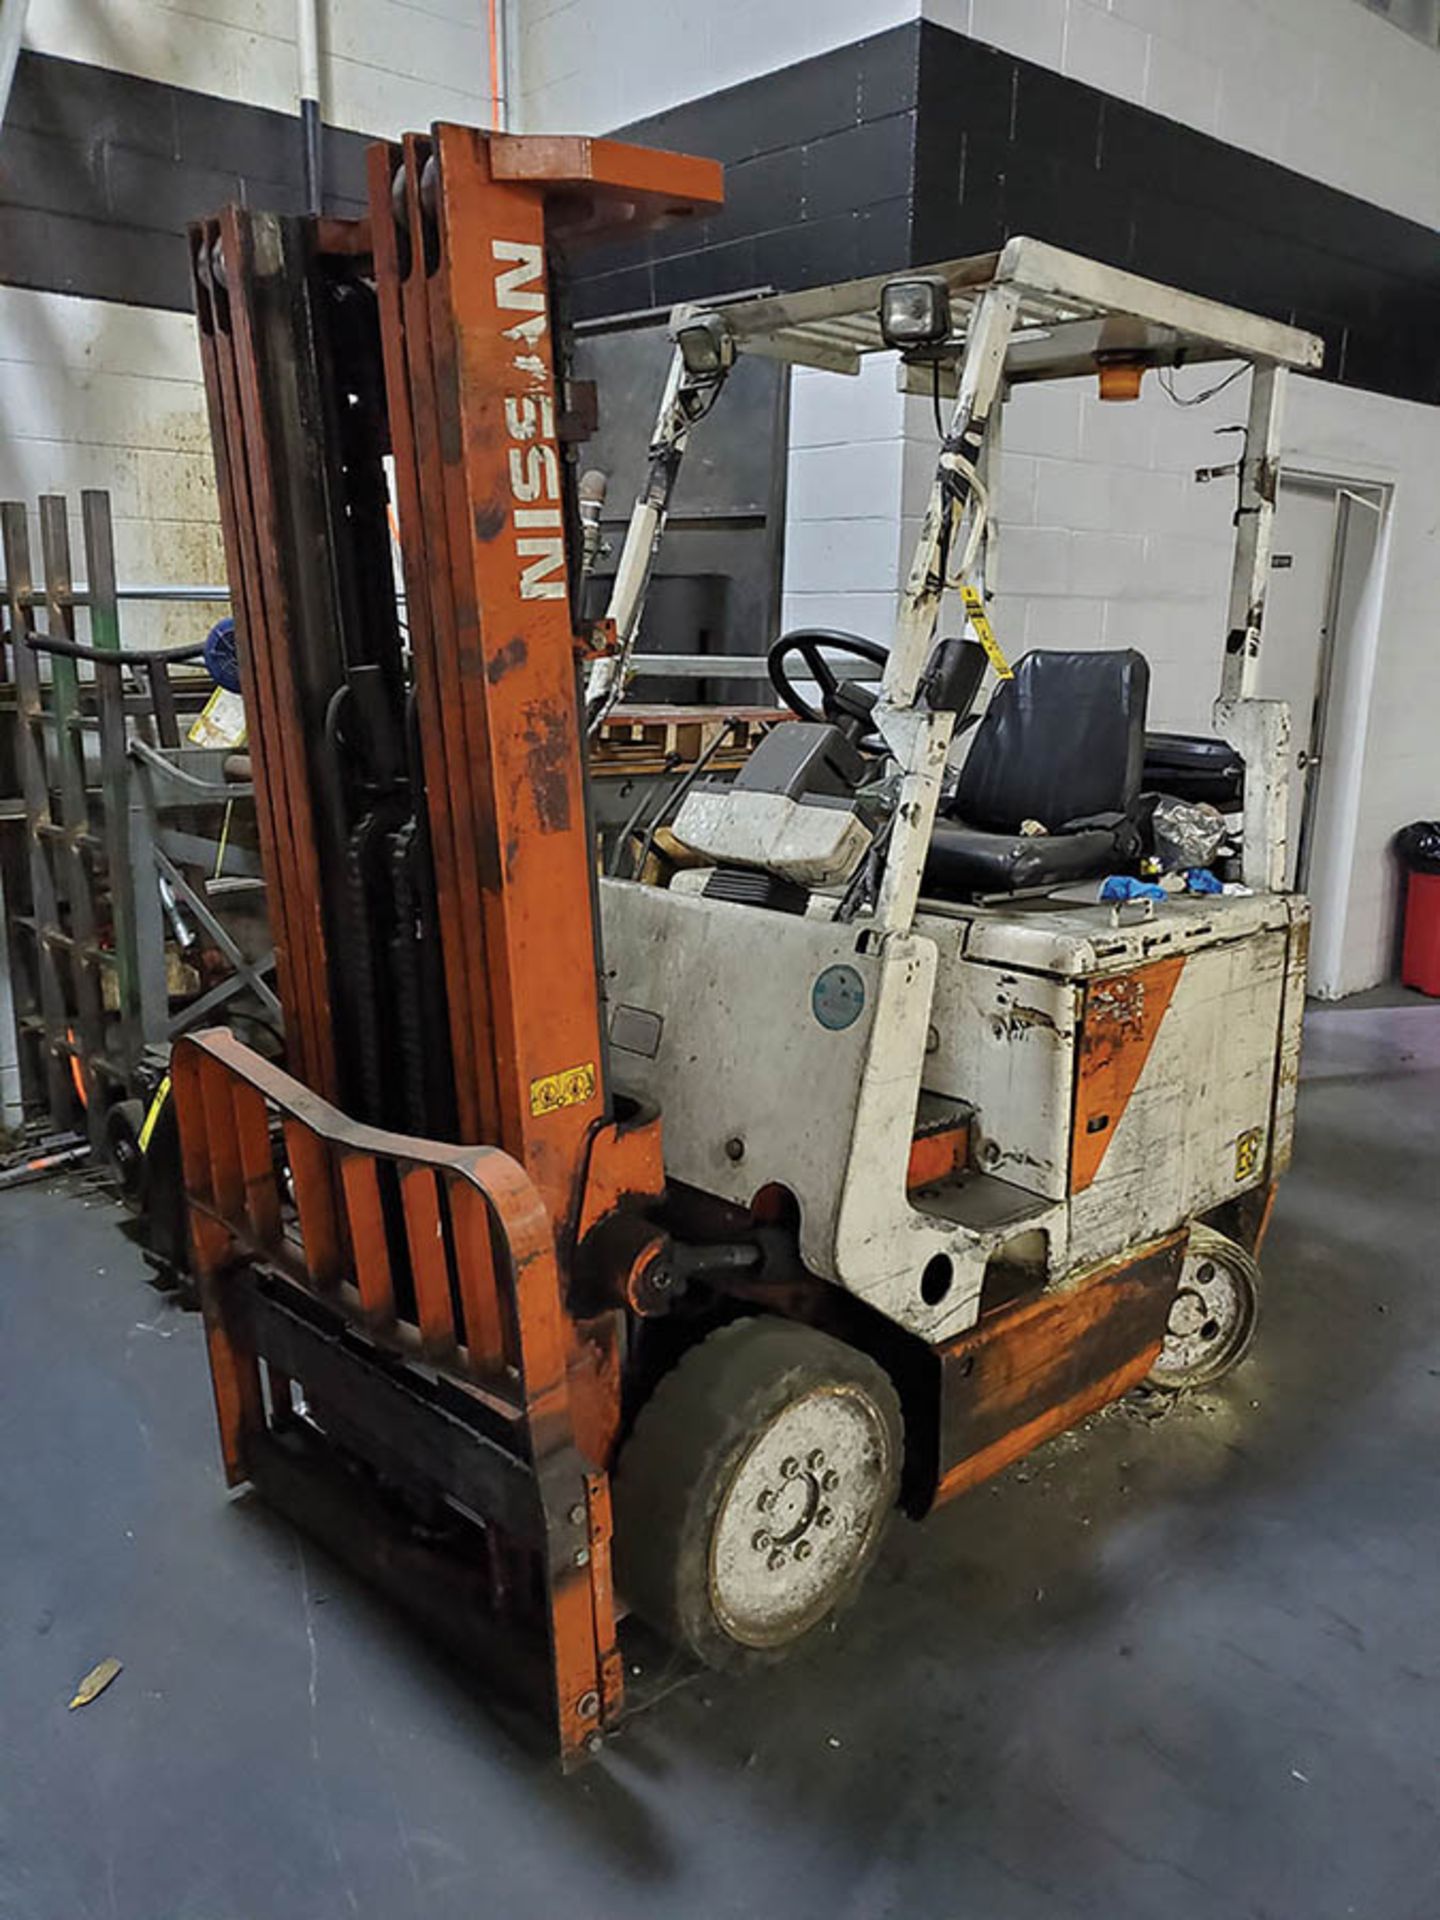 NISSAN 4,700 ELECTRIC FORKLIFT, 36V, SIDESHIFT, 3 STAGE MAST, SOLID TIRES (NEEDS REPAIR) - Image 3 of 6